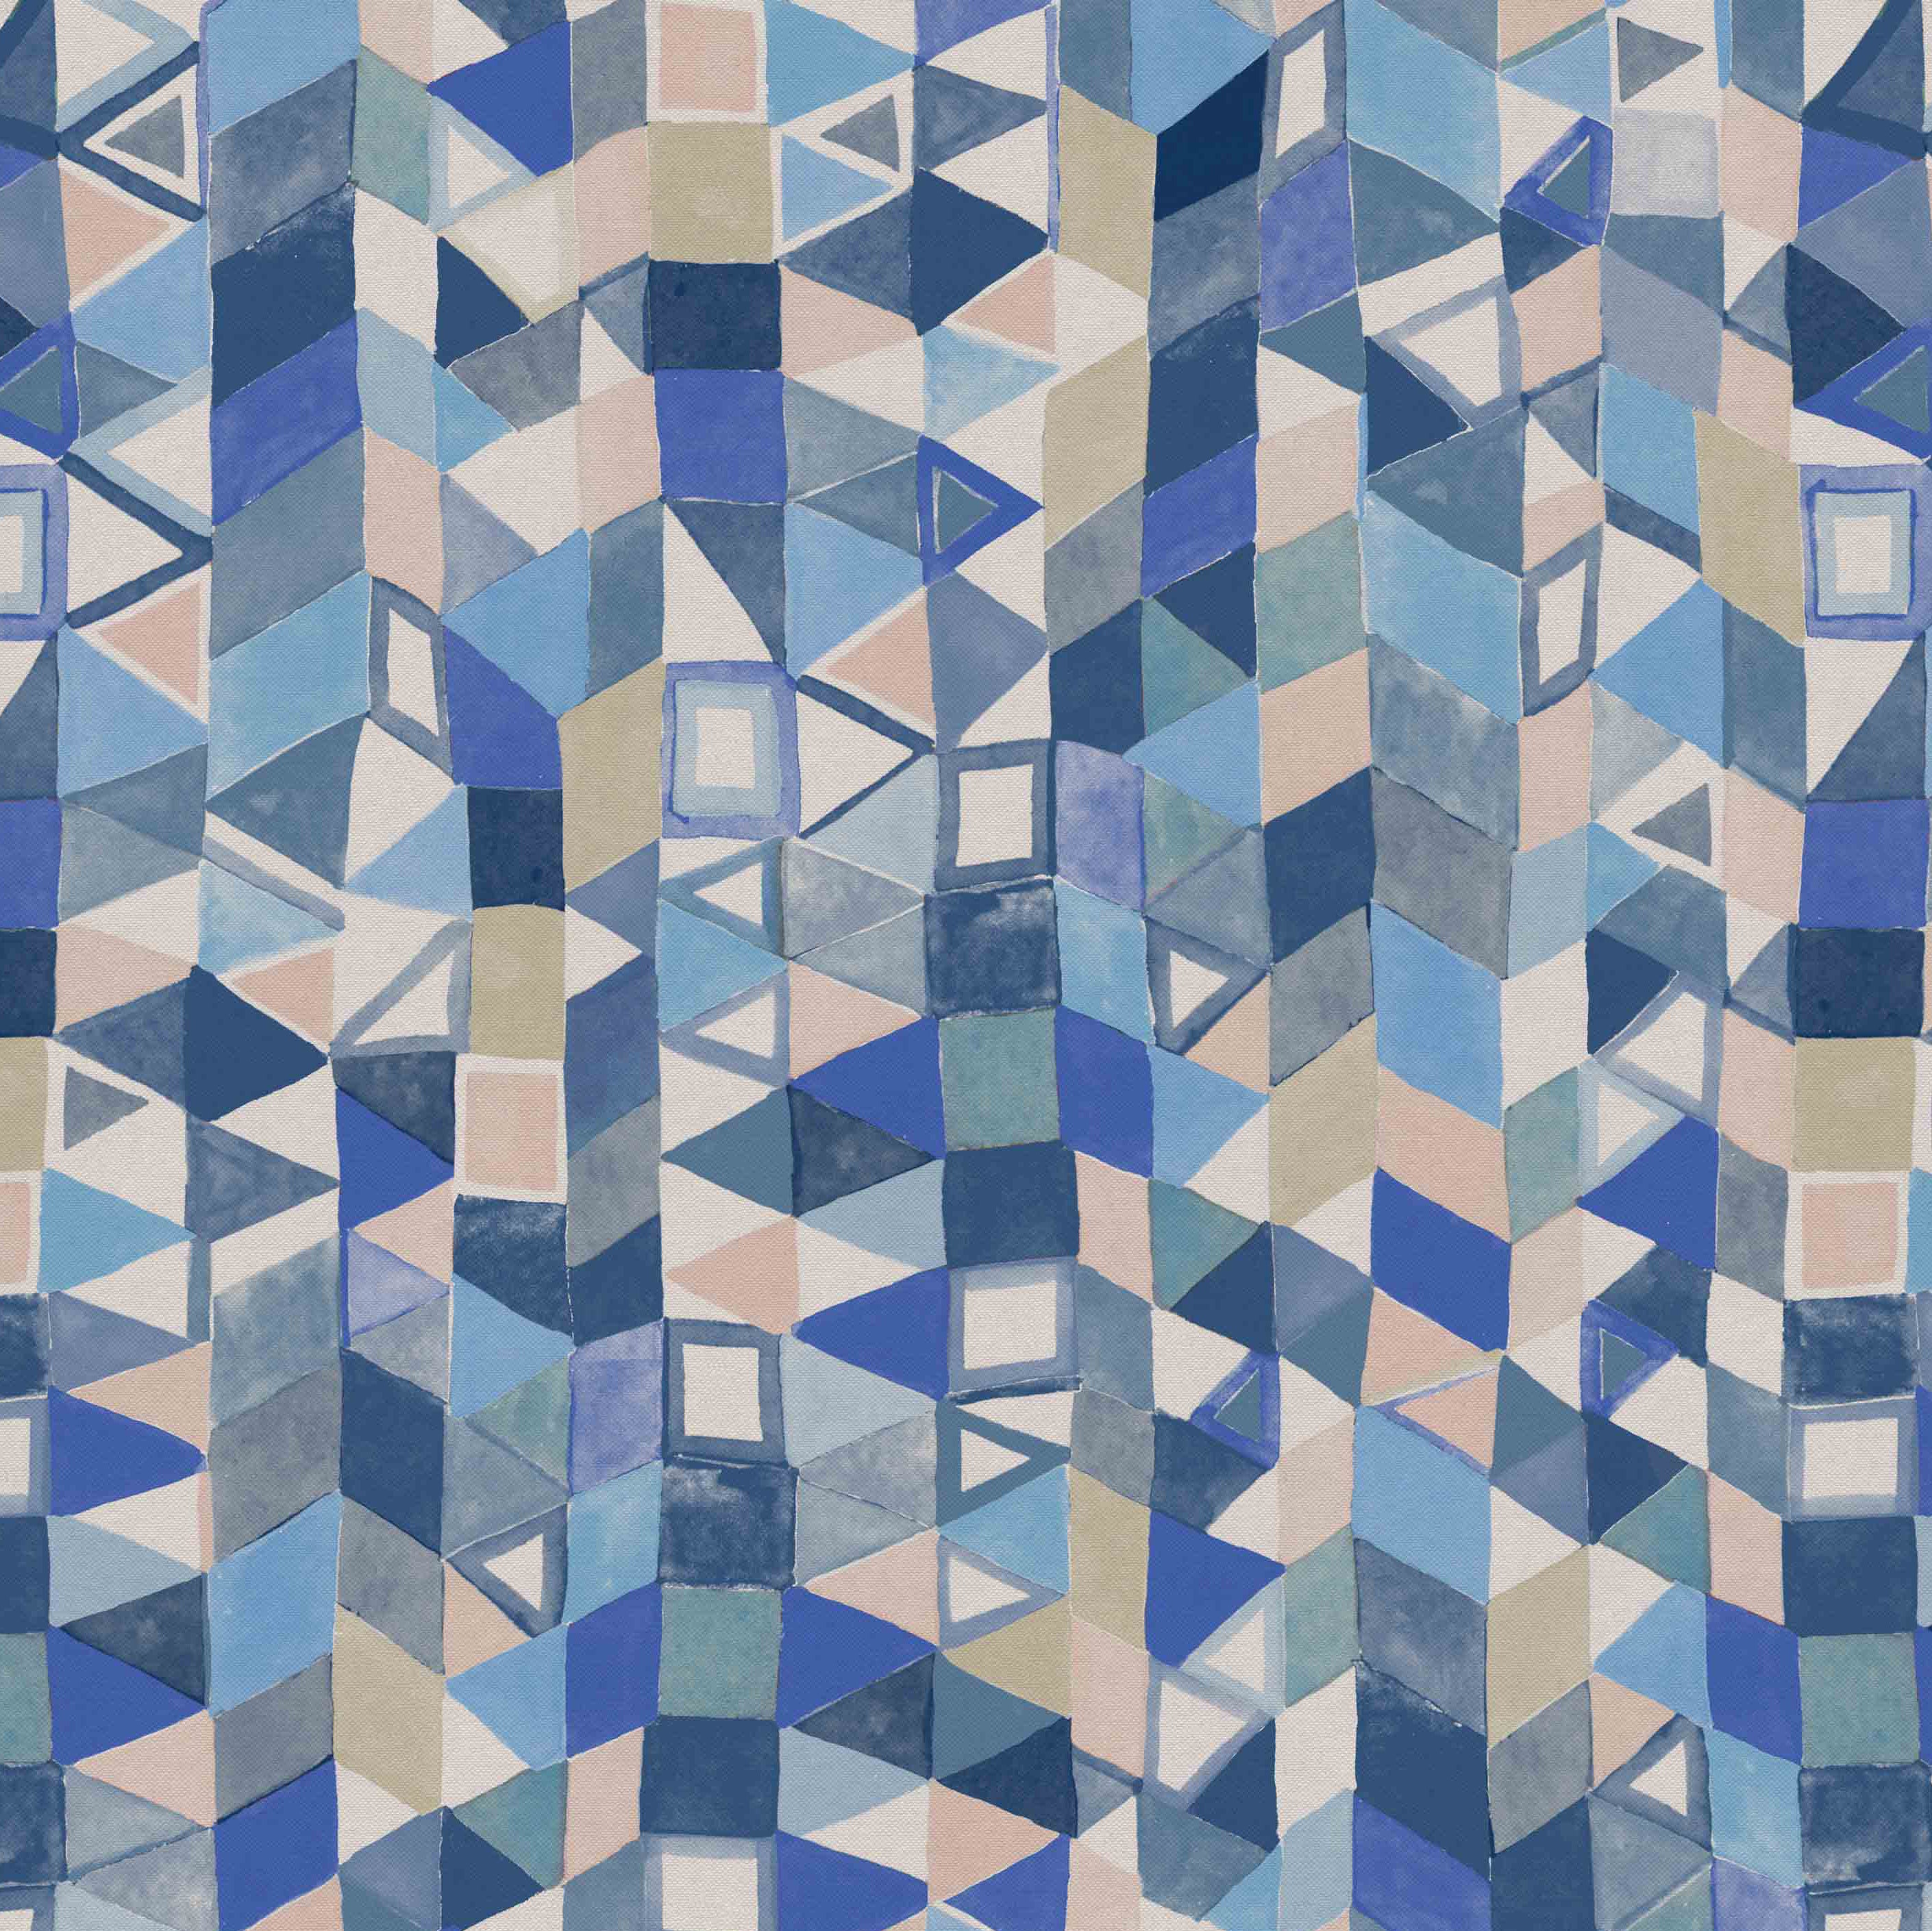 Detail of fabric in a small-scale playful geometric print in shades of blue, tan and navy.